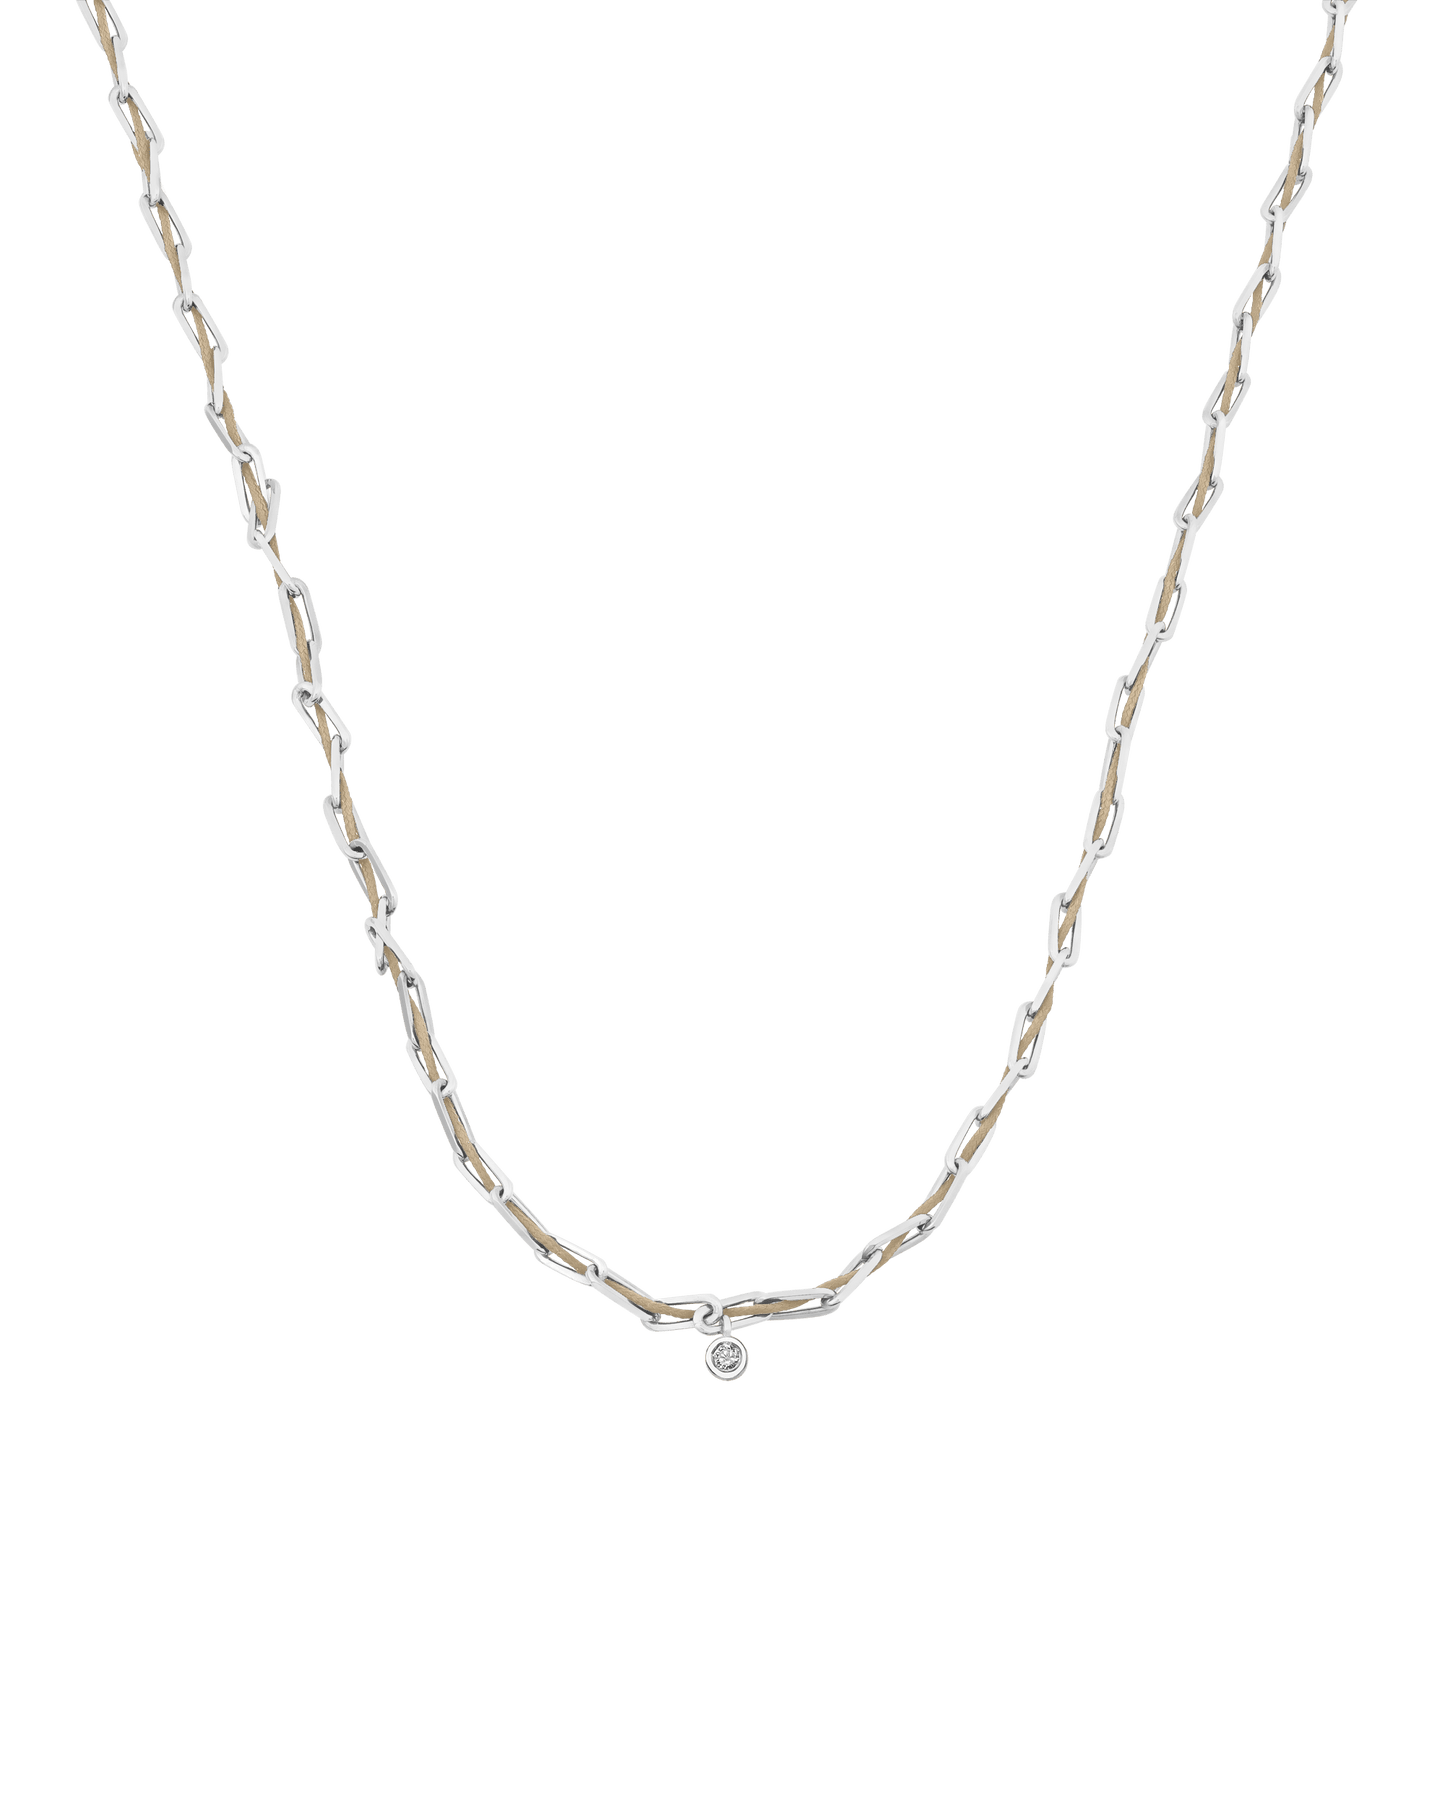 Twine Diamond Necklace - 925 Sterling Silver Necklaces magal-dev Sand Medium: 0.05ct 16"